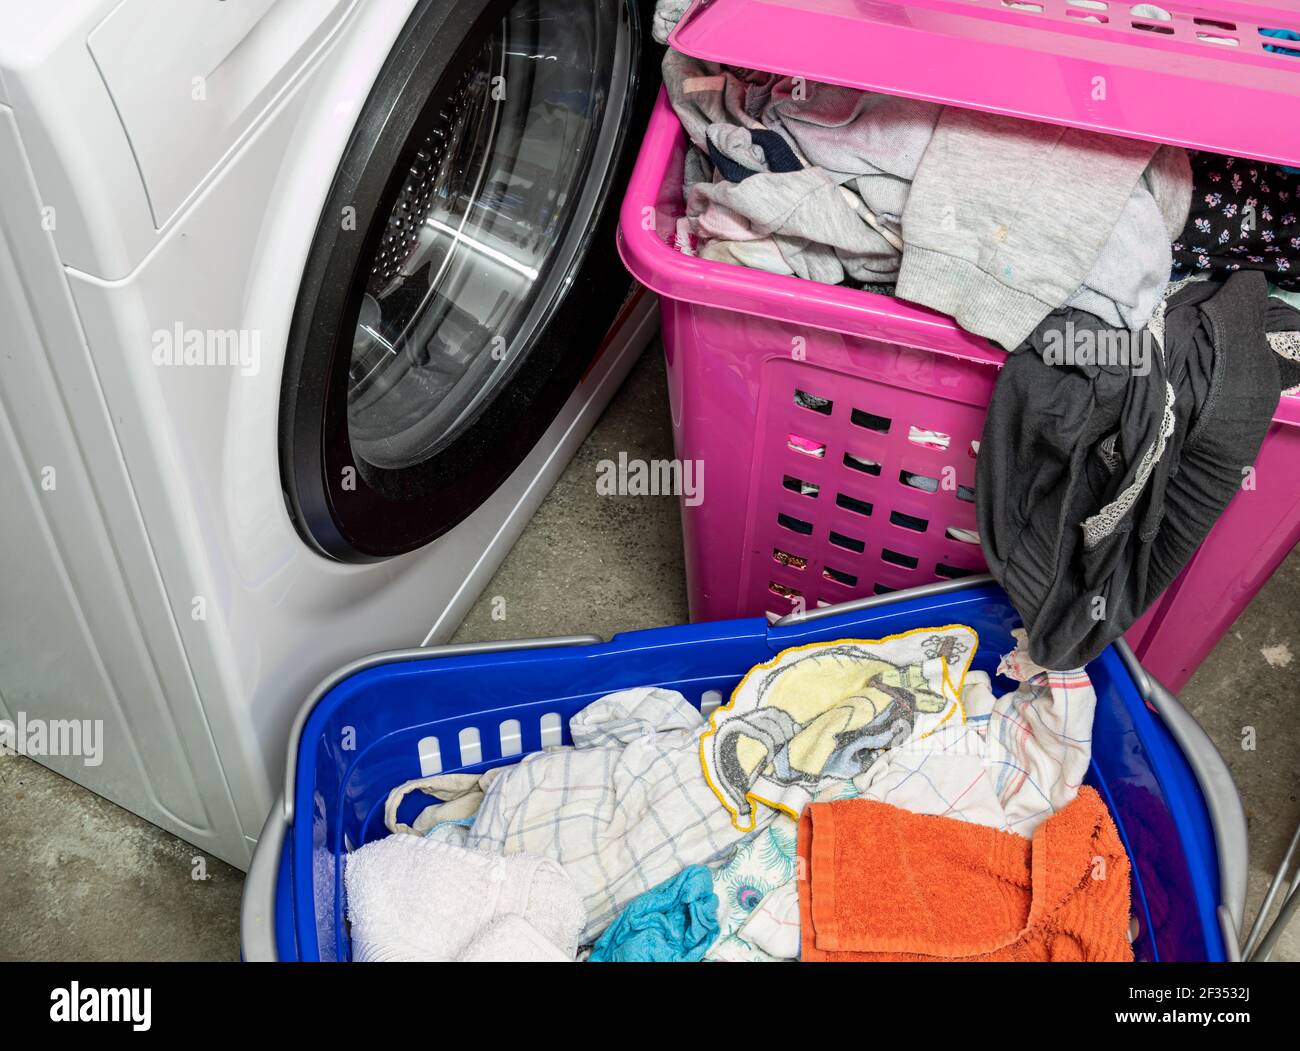 Laundry basket with laundry in the laundry room Stock Photo